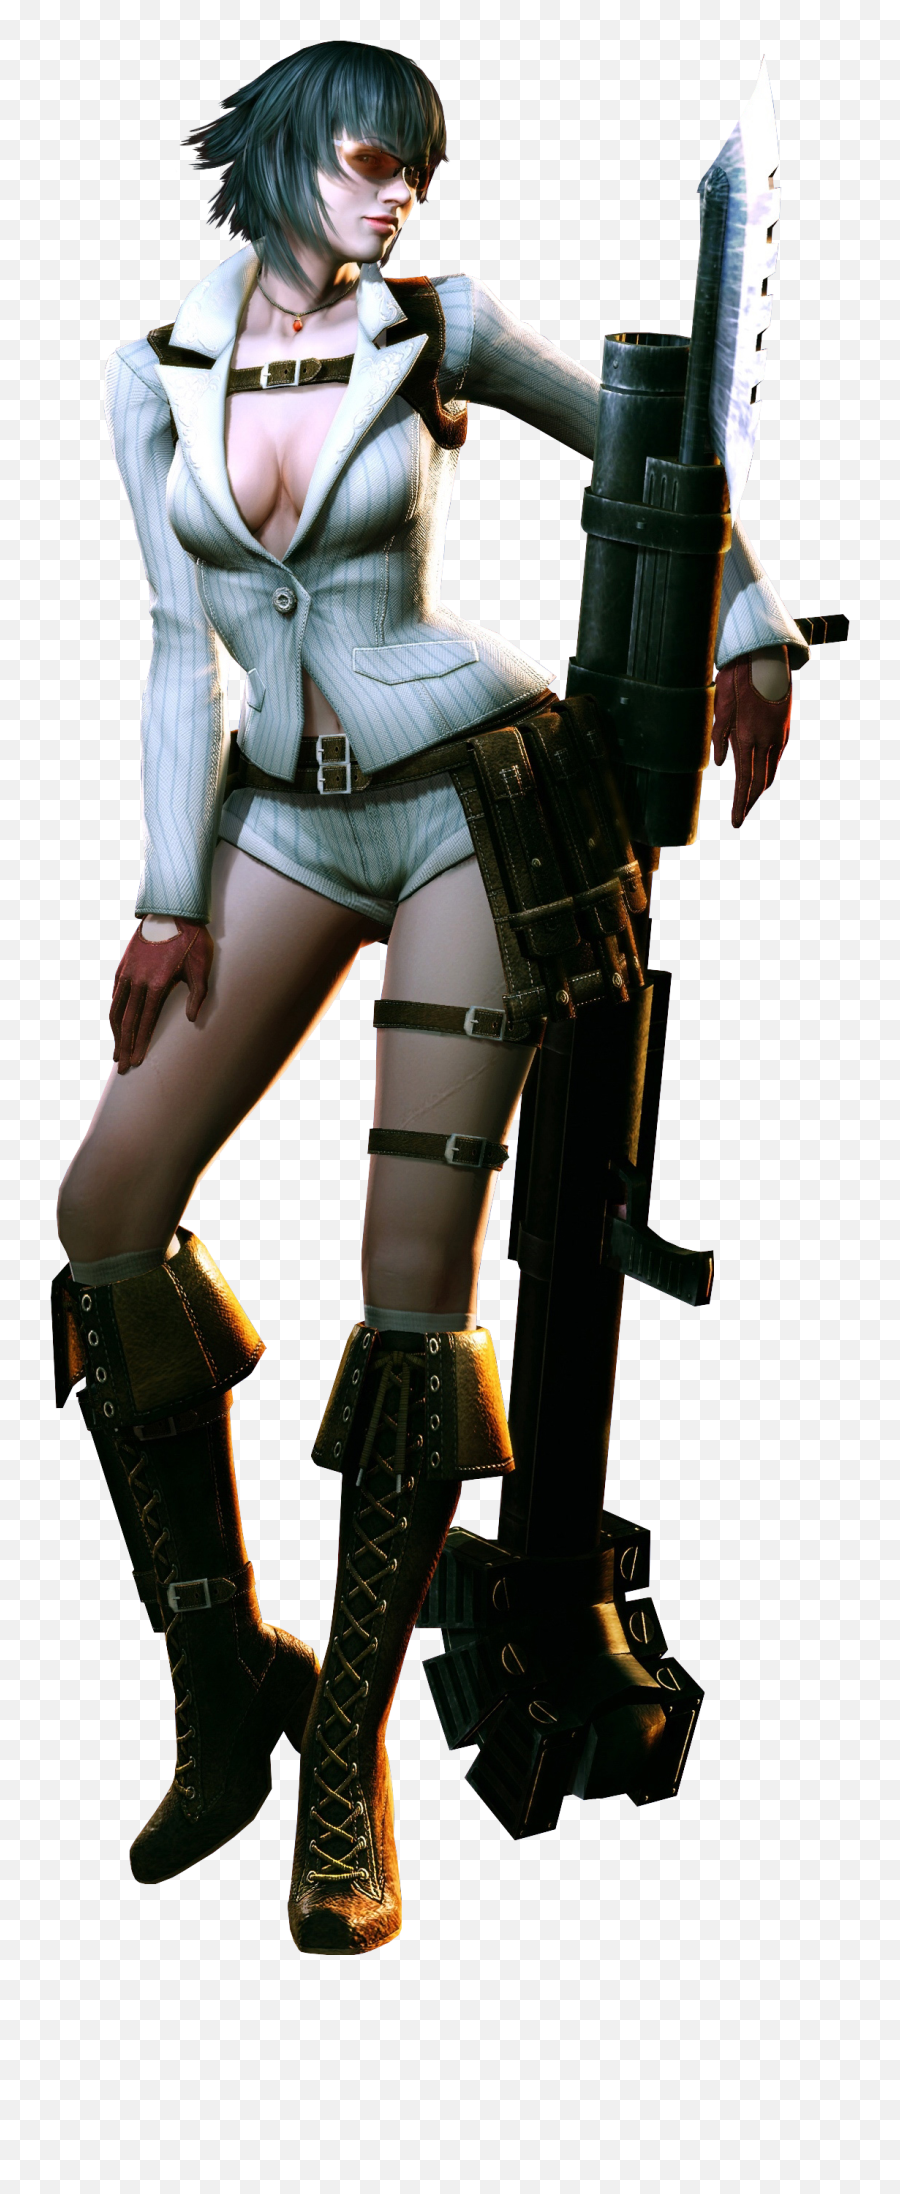 Costume Hd Wallpapers Backgrounds Page 15 - Lady Devil May Cry 4 Cosplay Emoji,Satsuki Showing Emotion